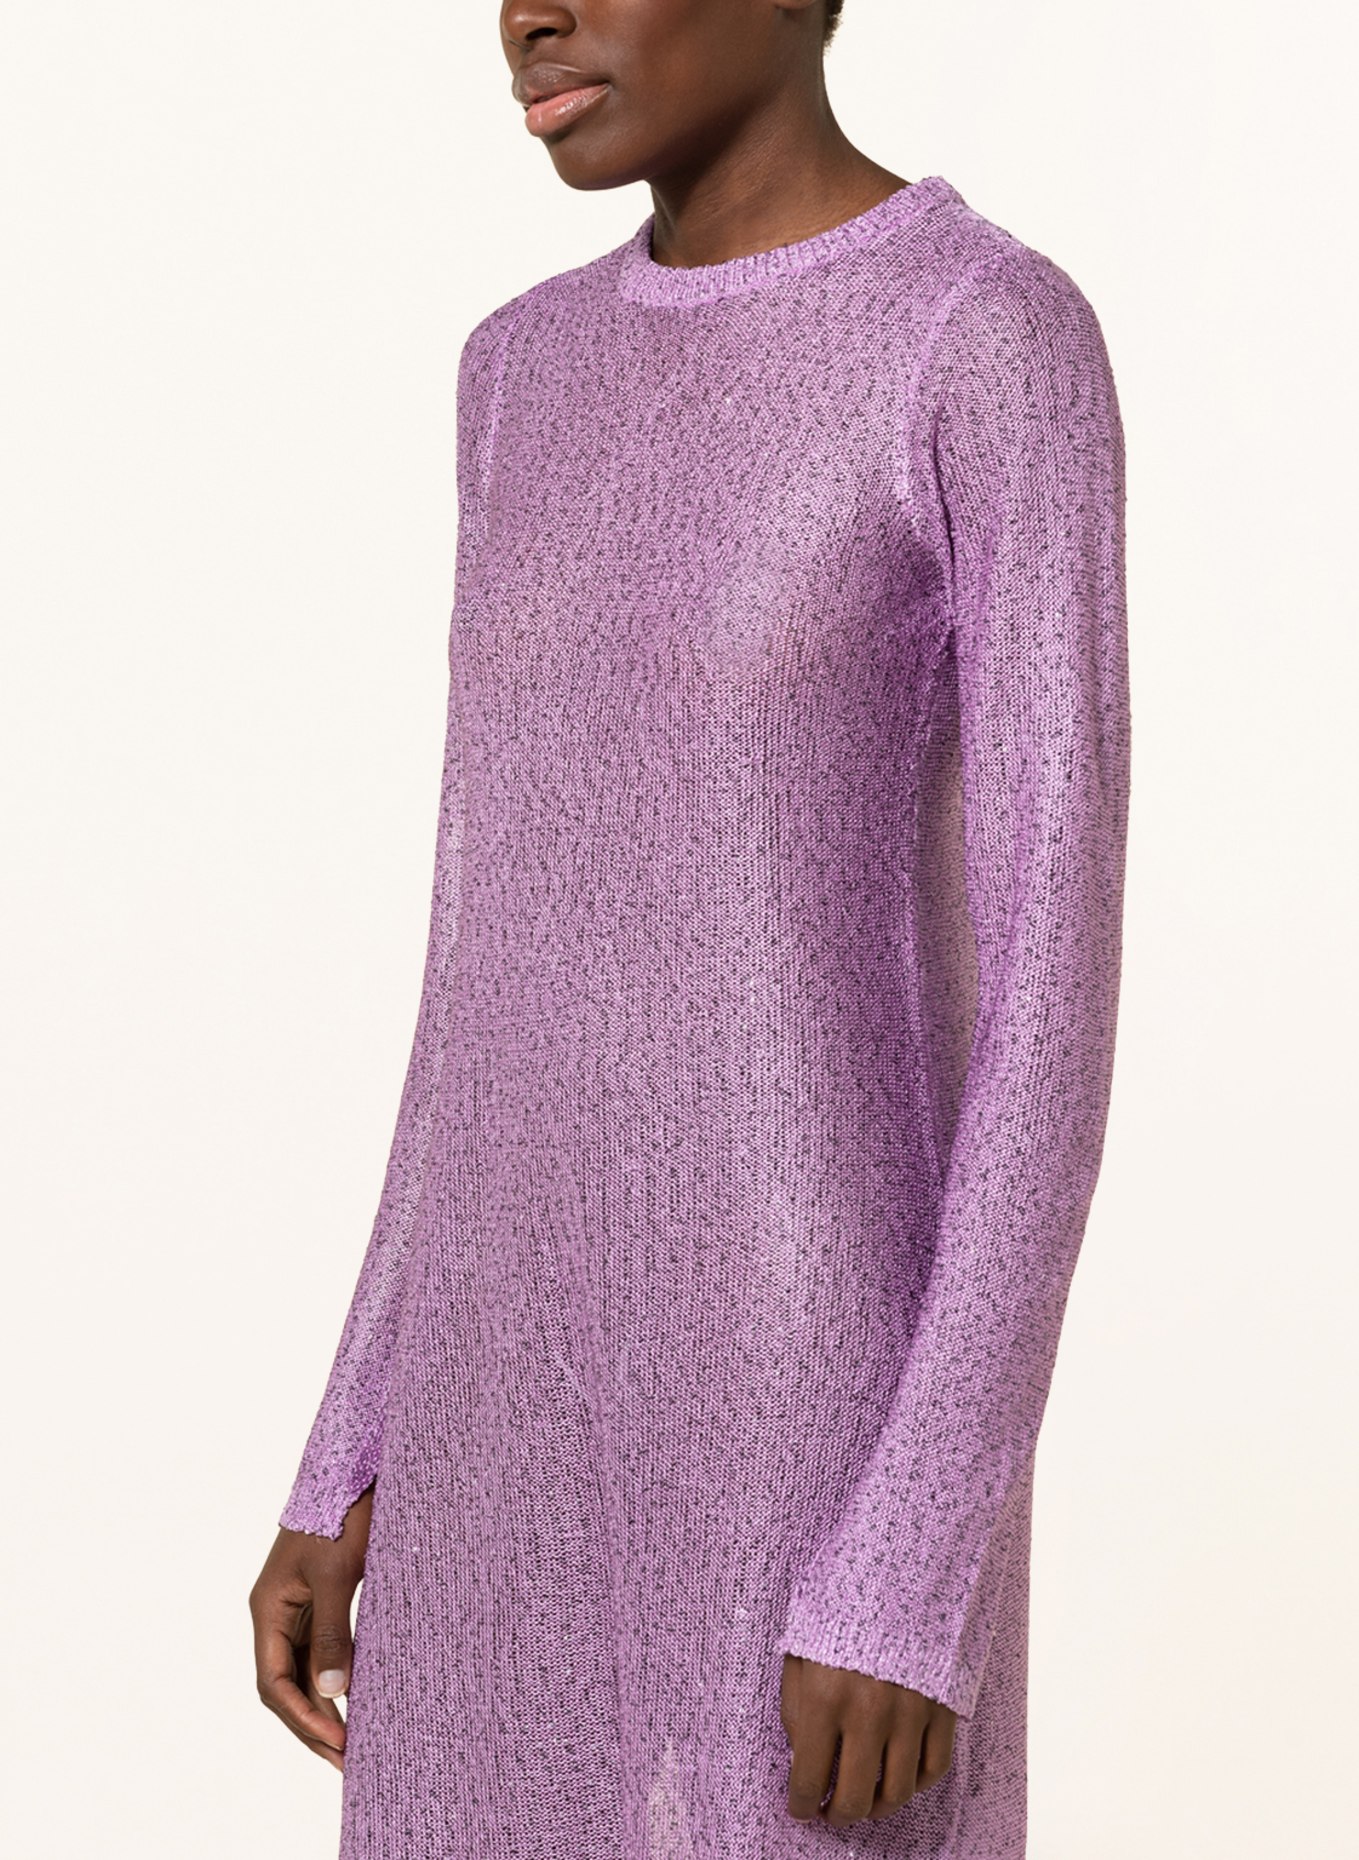 REMAIN Knit dress with sequins, Color: LIGHT PURPLE/ DARK GRAY (Image 4)